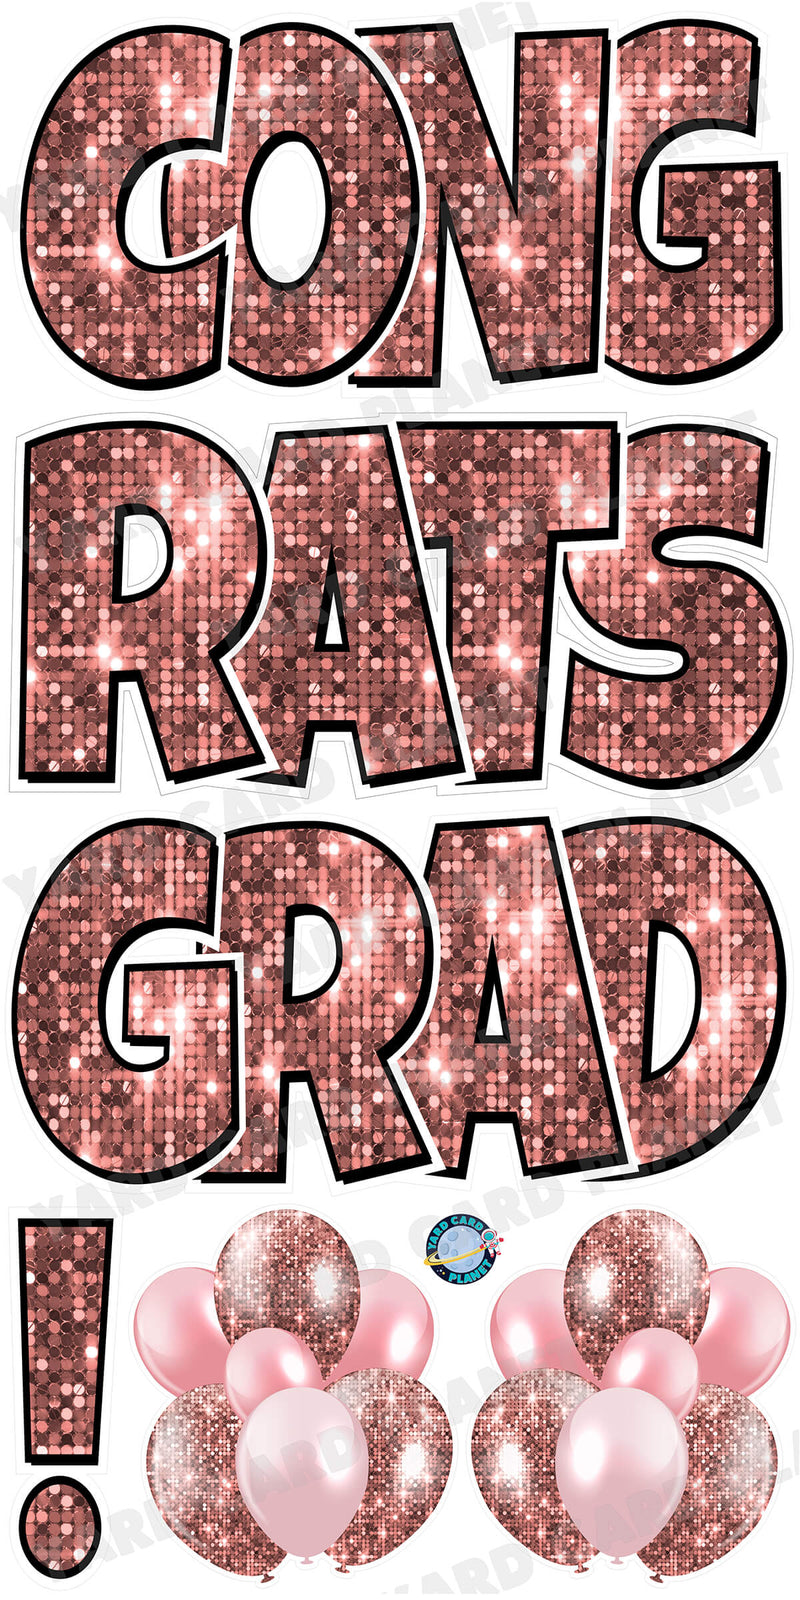 Large 23.5" Congrats Grad! Yard Card EZ Quick Sets in Luckiest Guy Font in Sequin Pattern - (Available in Multiple Colors)